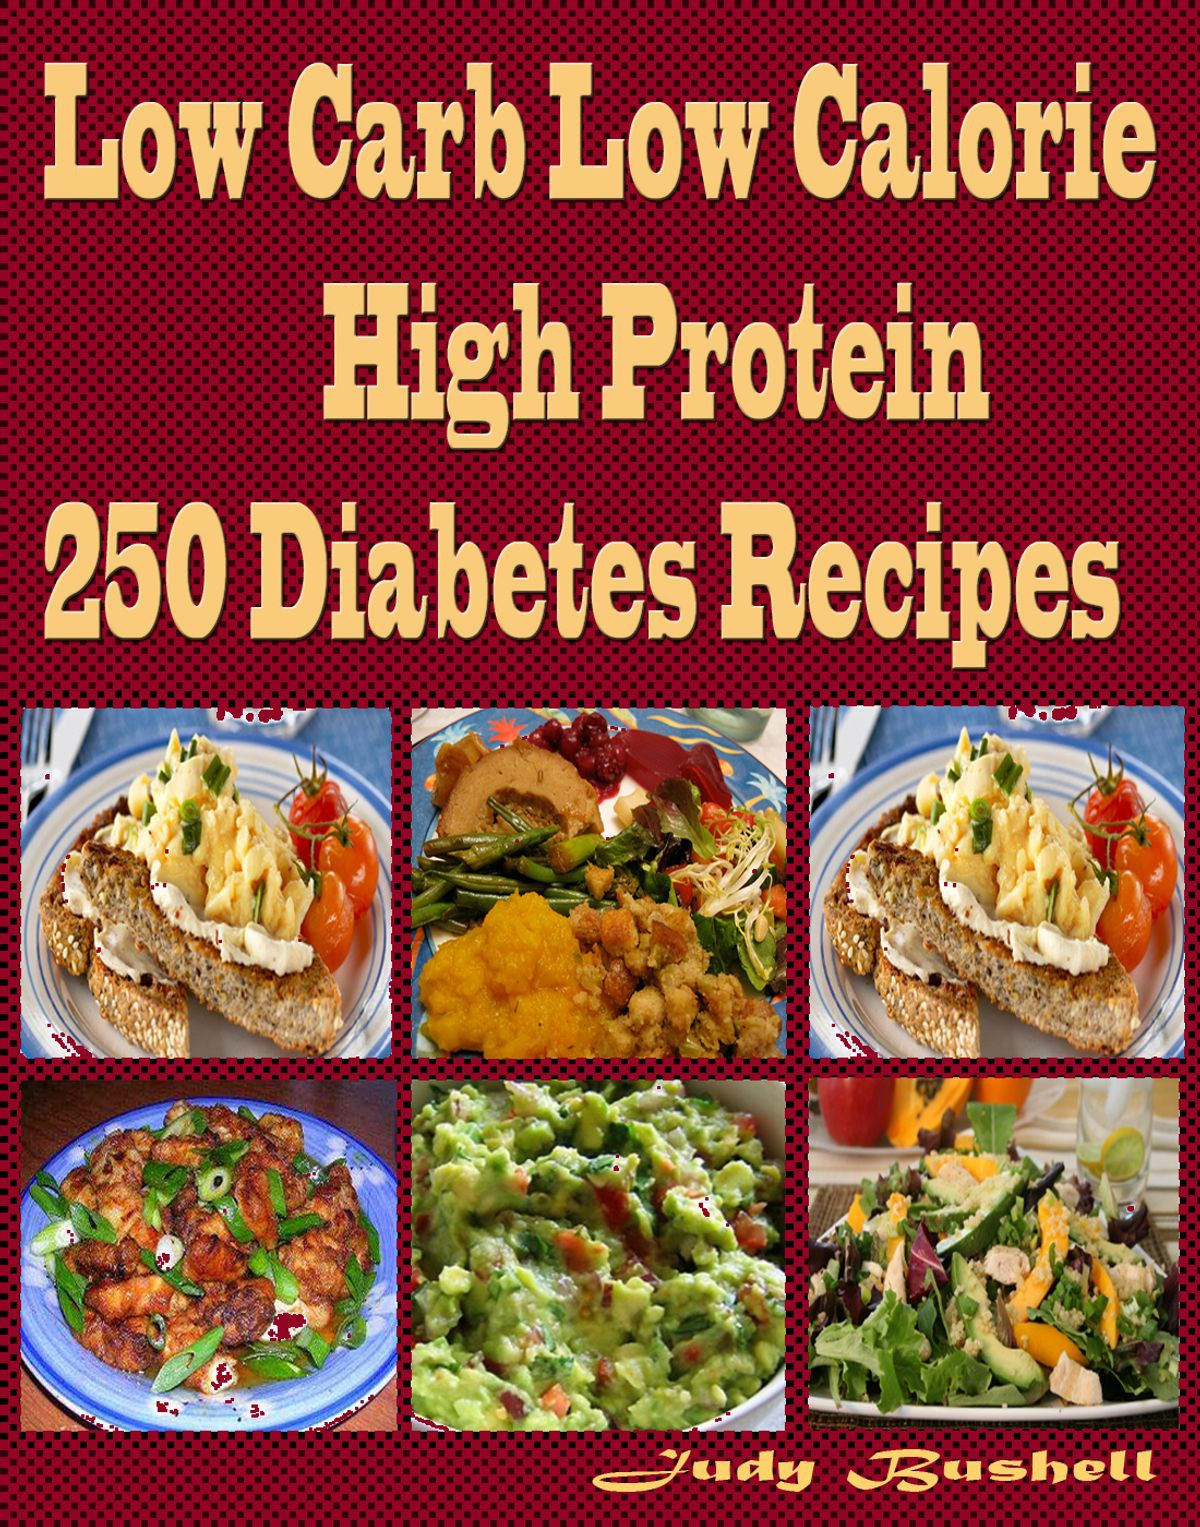 Low Carb Low Calorie Recipes Food Network
 Low Carb Low Calorie High Protein 250 Diabetes Recipes